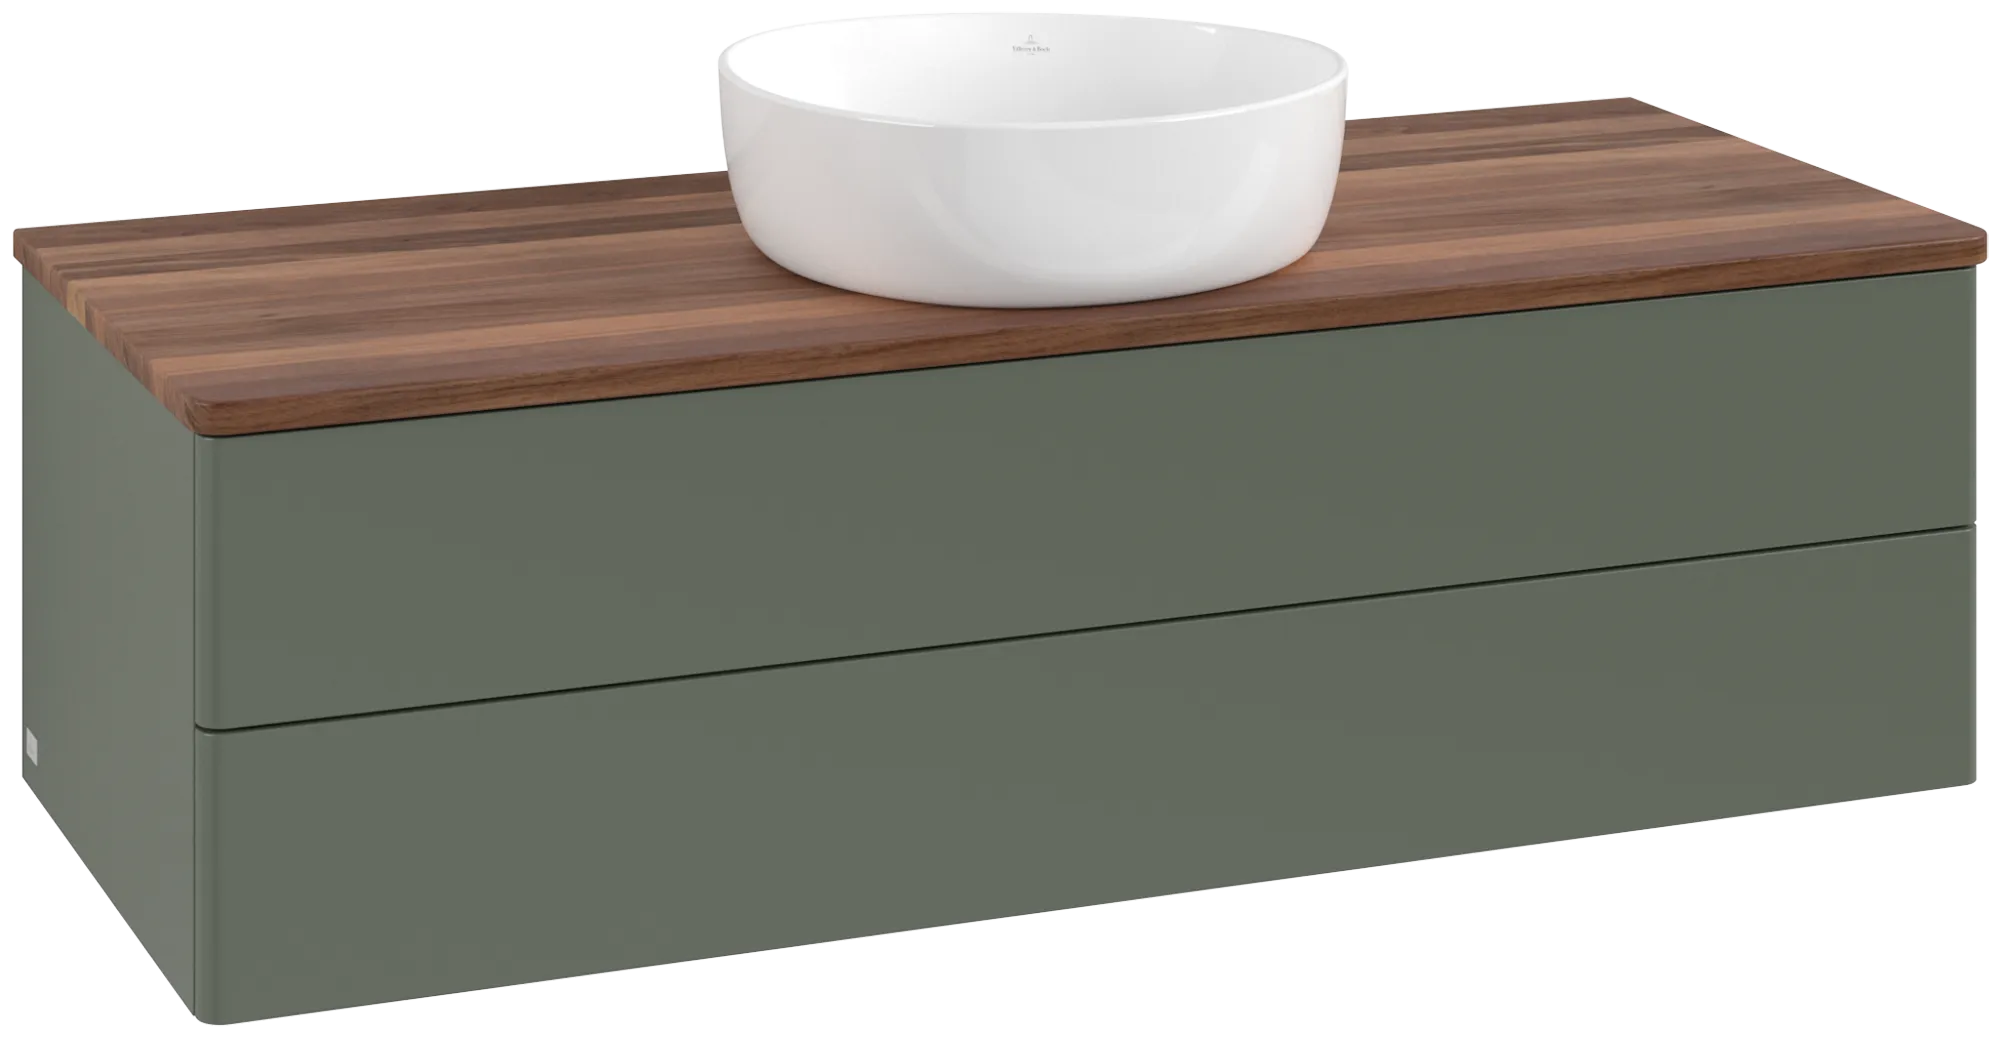 Picture of VILLEROY BOCH Antao Vanity unit, 2 pull-out compartments, 1200 x 360 x 500 mm, Front without structure, Leaf Green Matt Lacquer / Warm Walnut #K21012HL